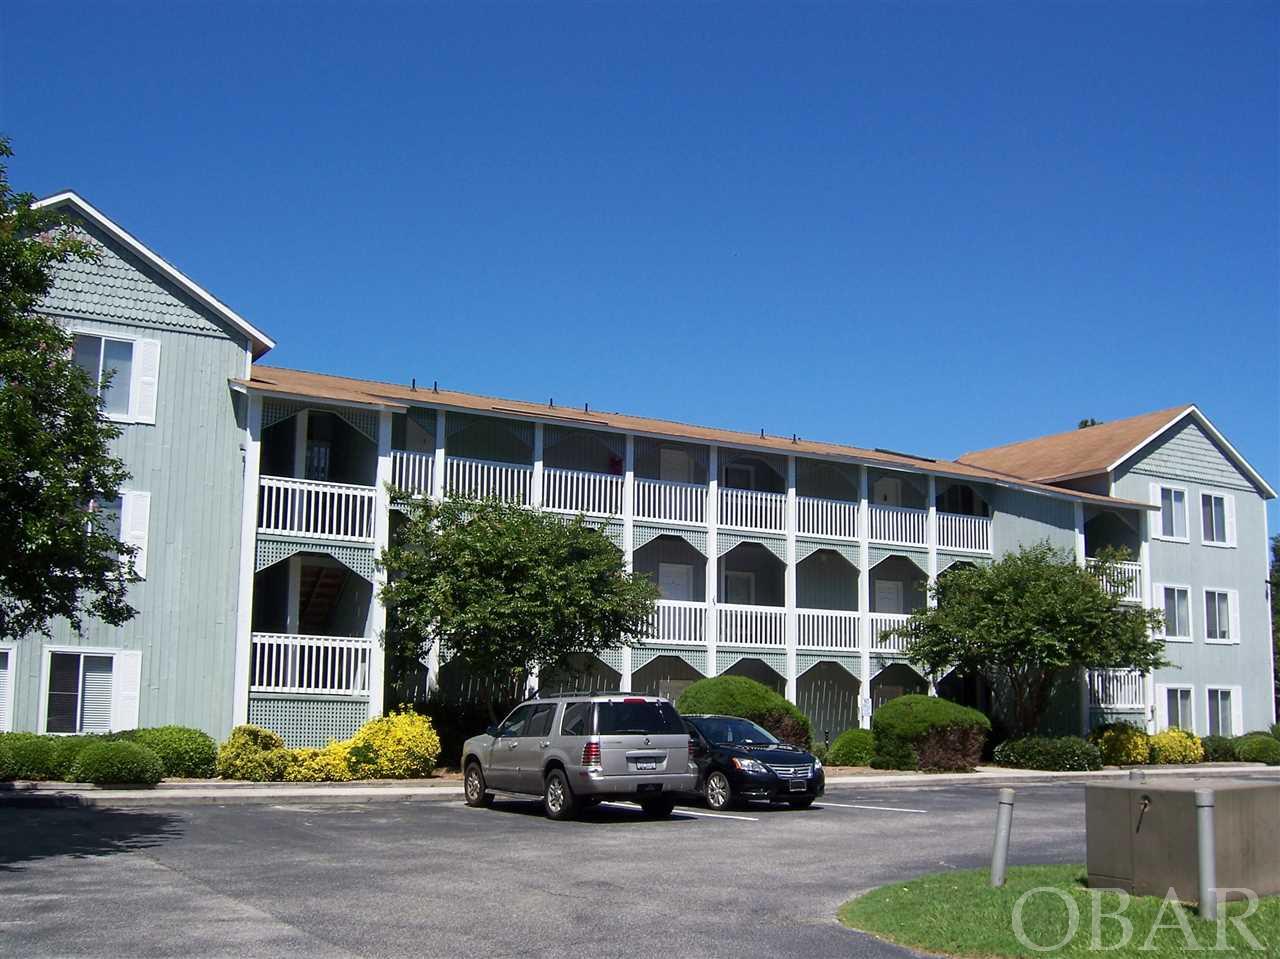 117 Old NC 345 Unit 302 Outer Banks Home Listings - Holleay Parcker - Spinnaker Realty Outer Banks (OBX) Real Estate